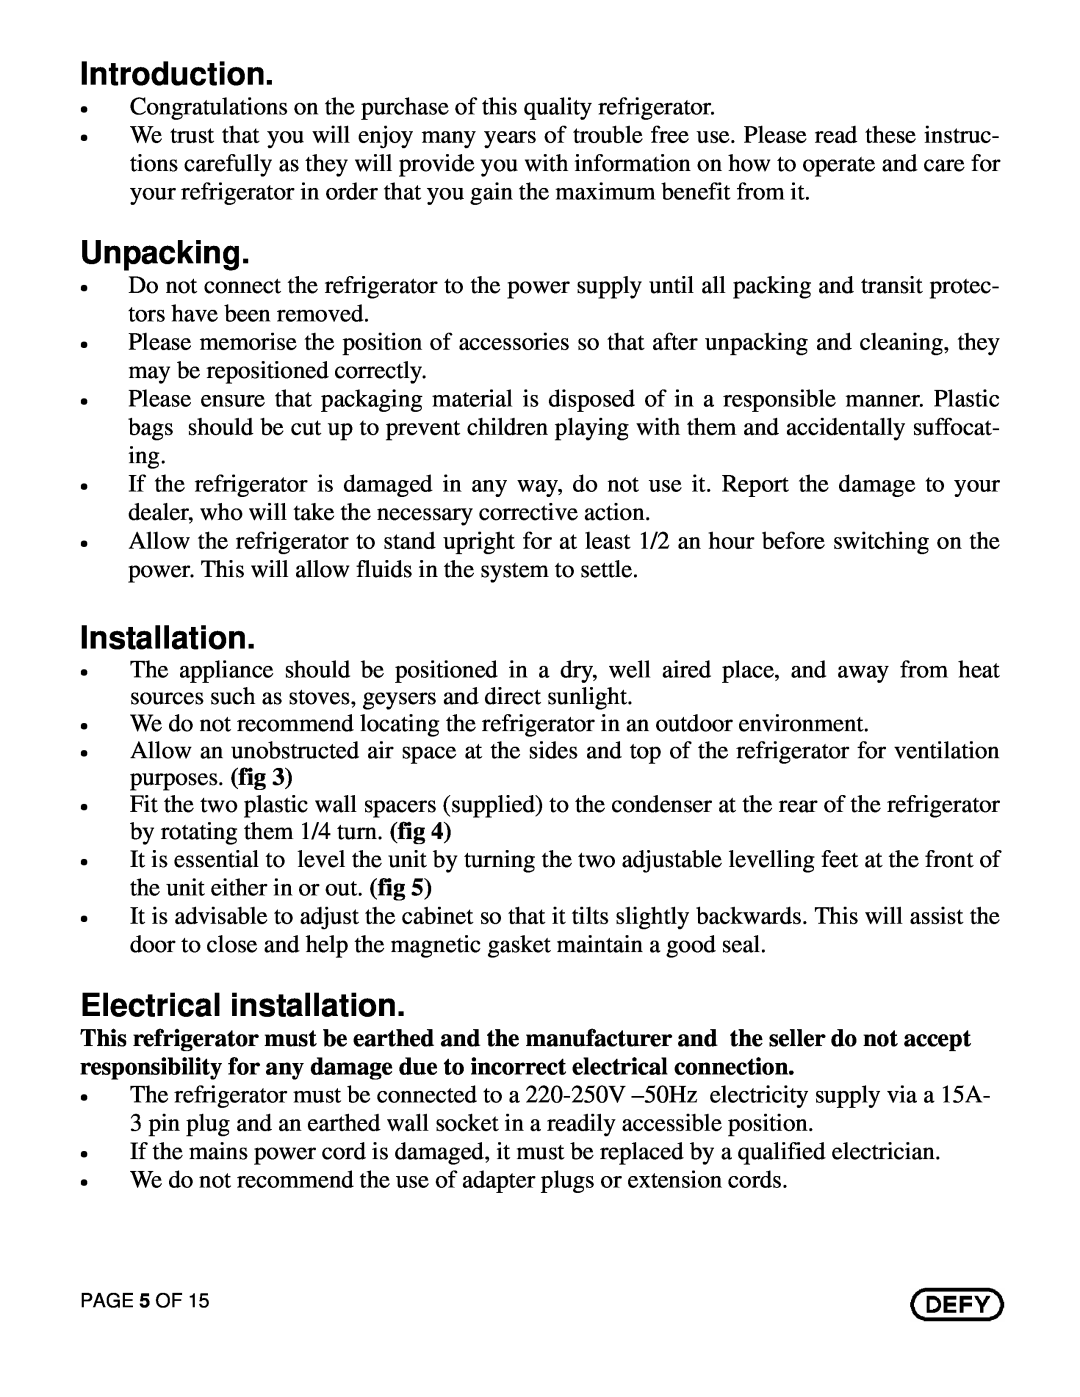 Defy Appliances C375 owner manual Introduction, Unpacking, Installation, Electrical installation 